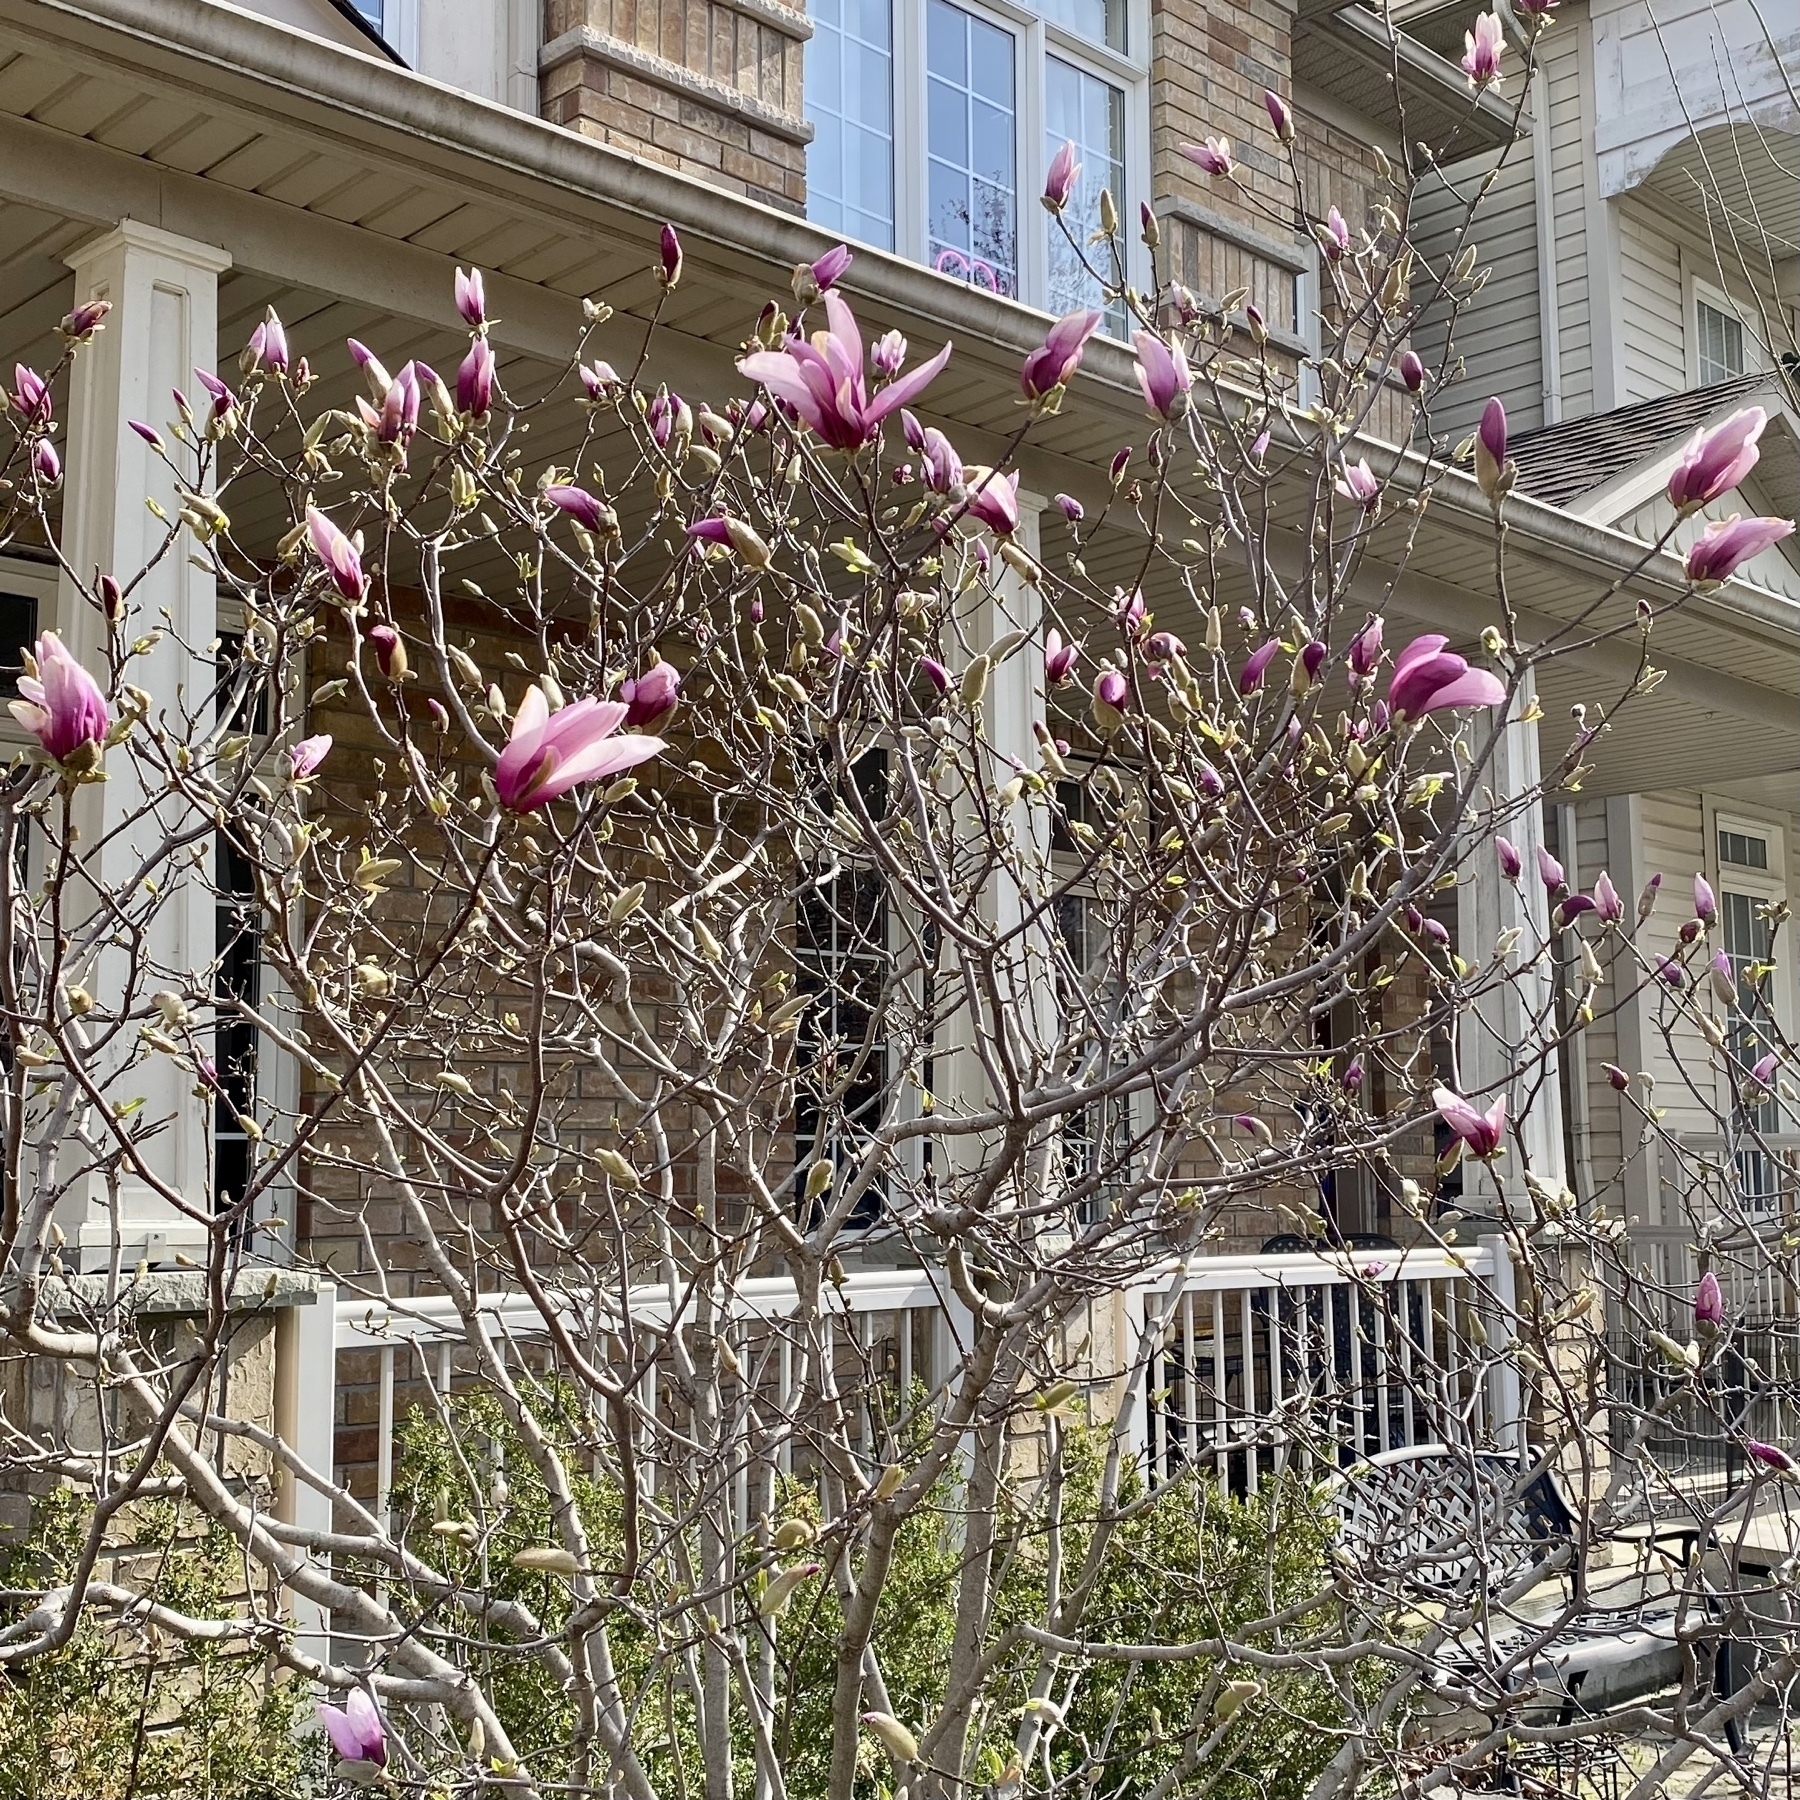 Magnolia tree with a dozen flower buds just starting to open